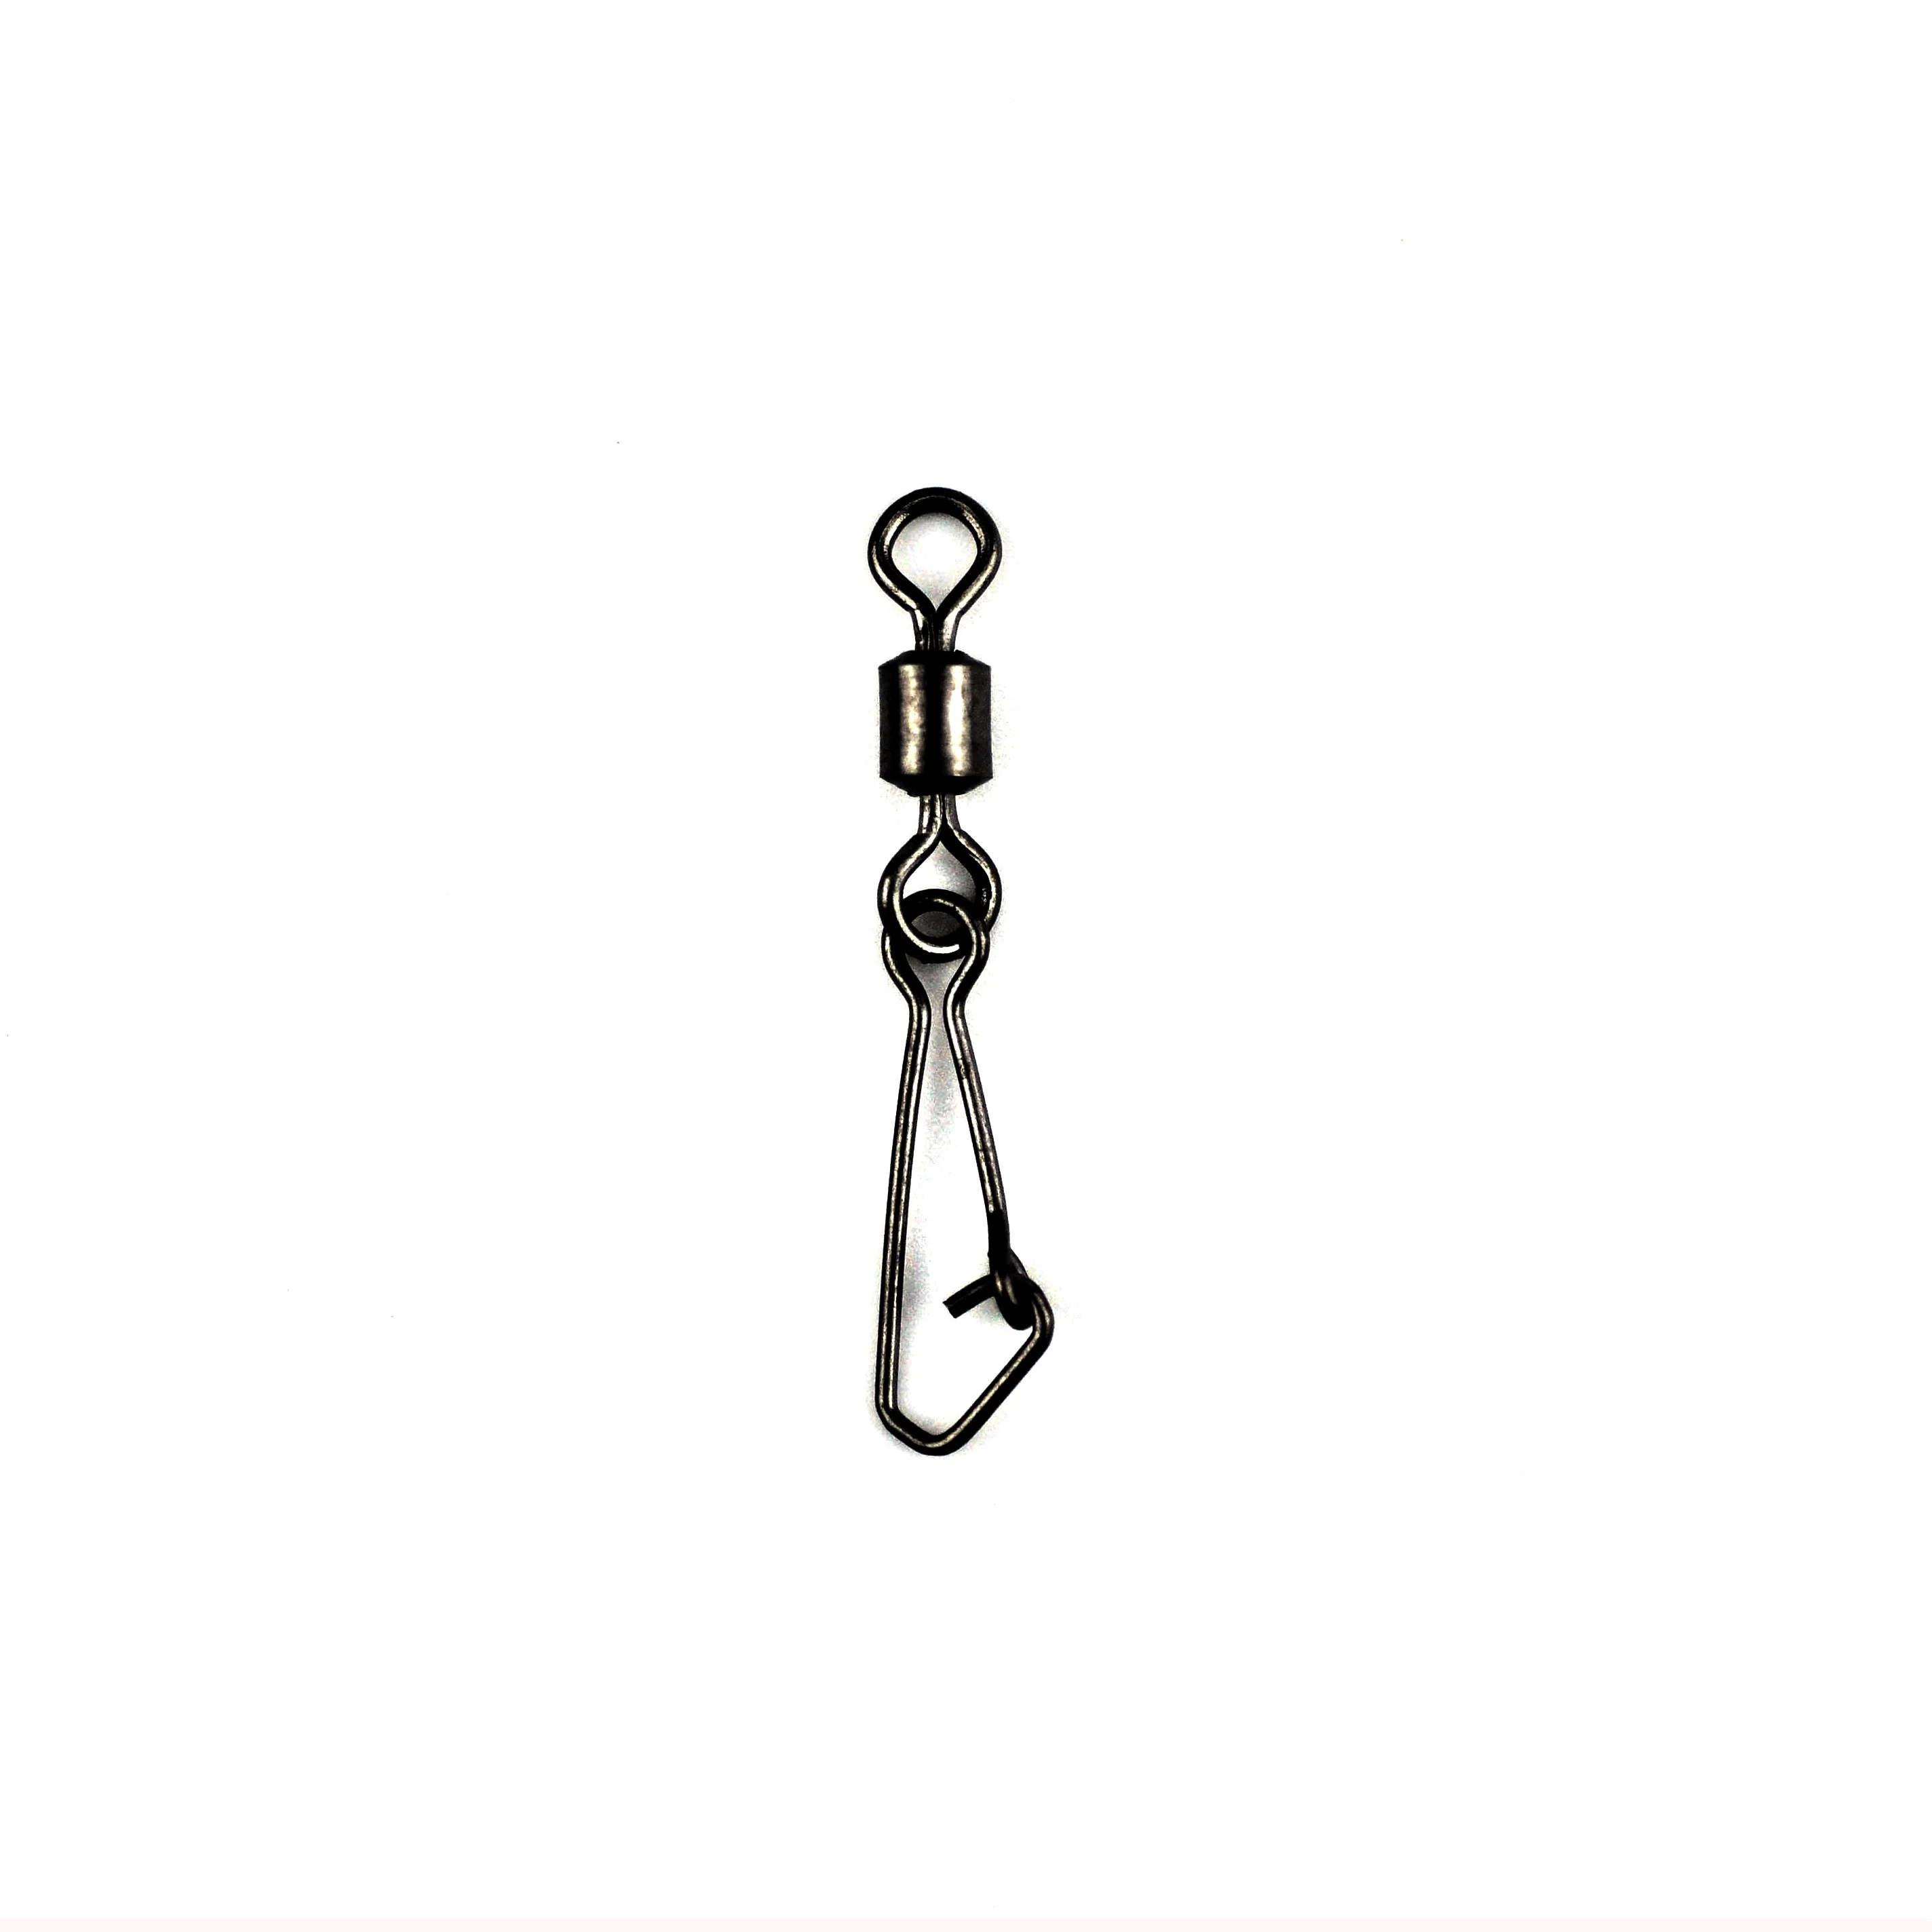 

Stainless Steel Fishing Rolling Swivel with Hooked Snap Connector Fishing Tackle Accessory